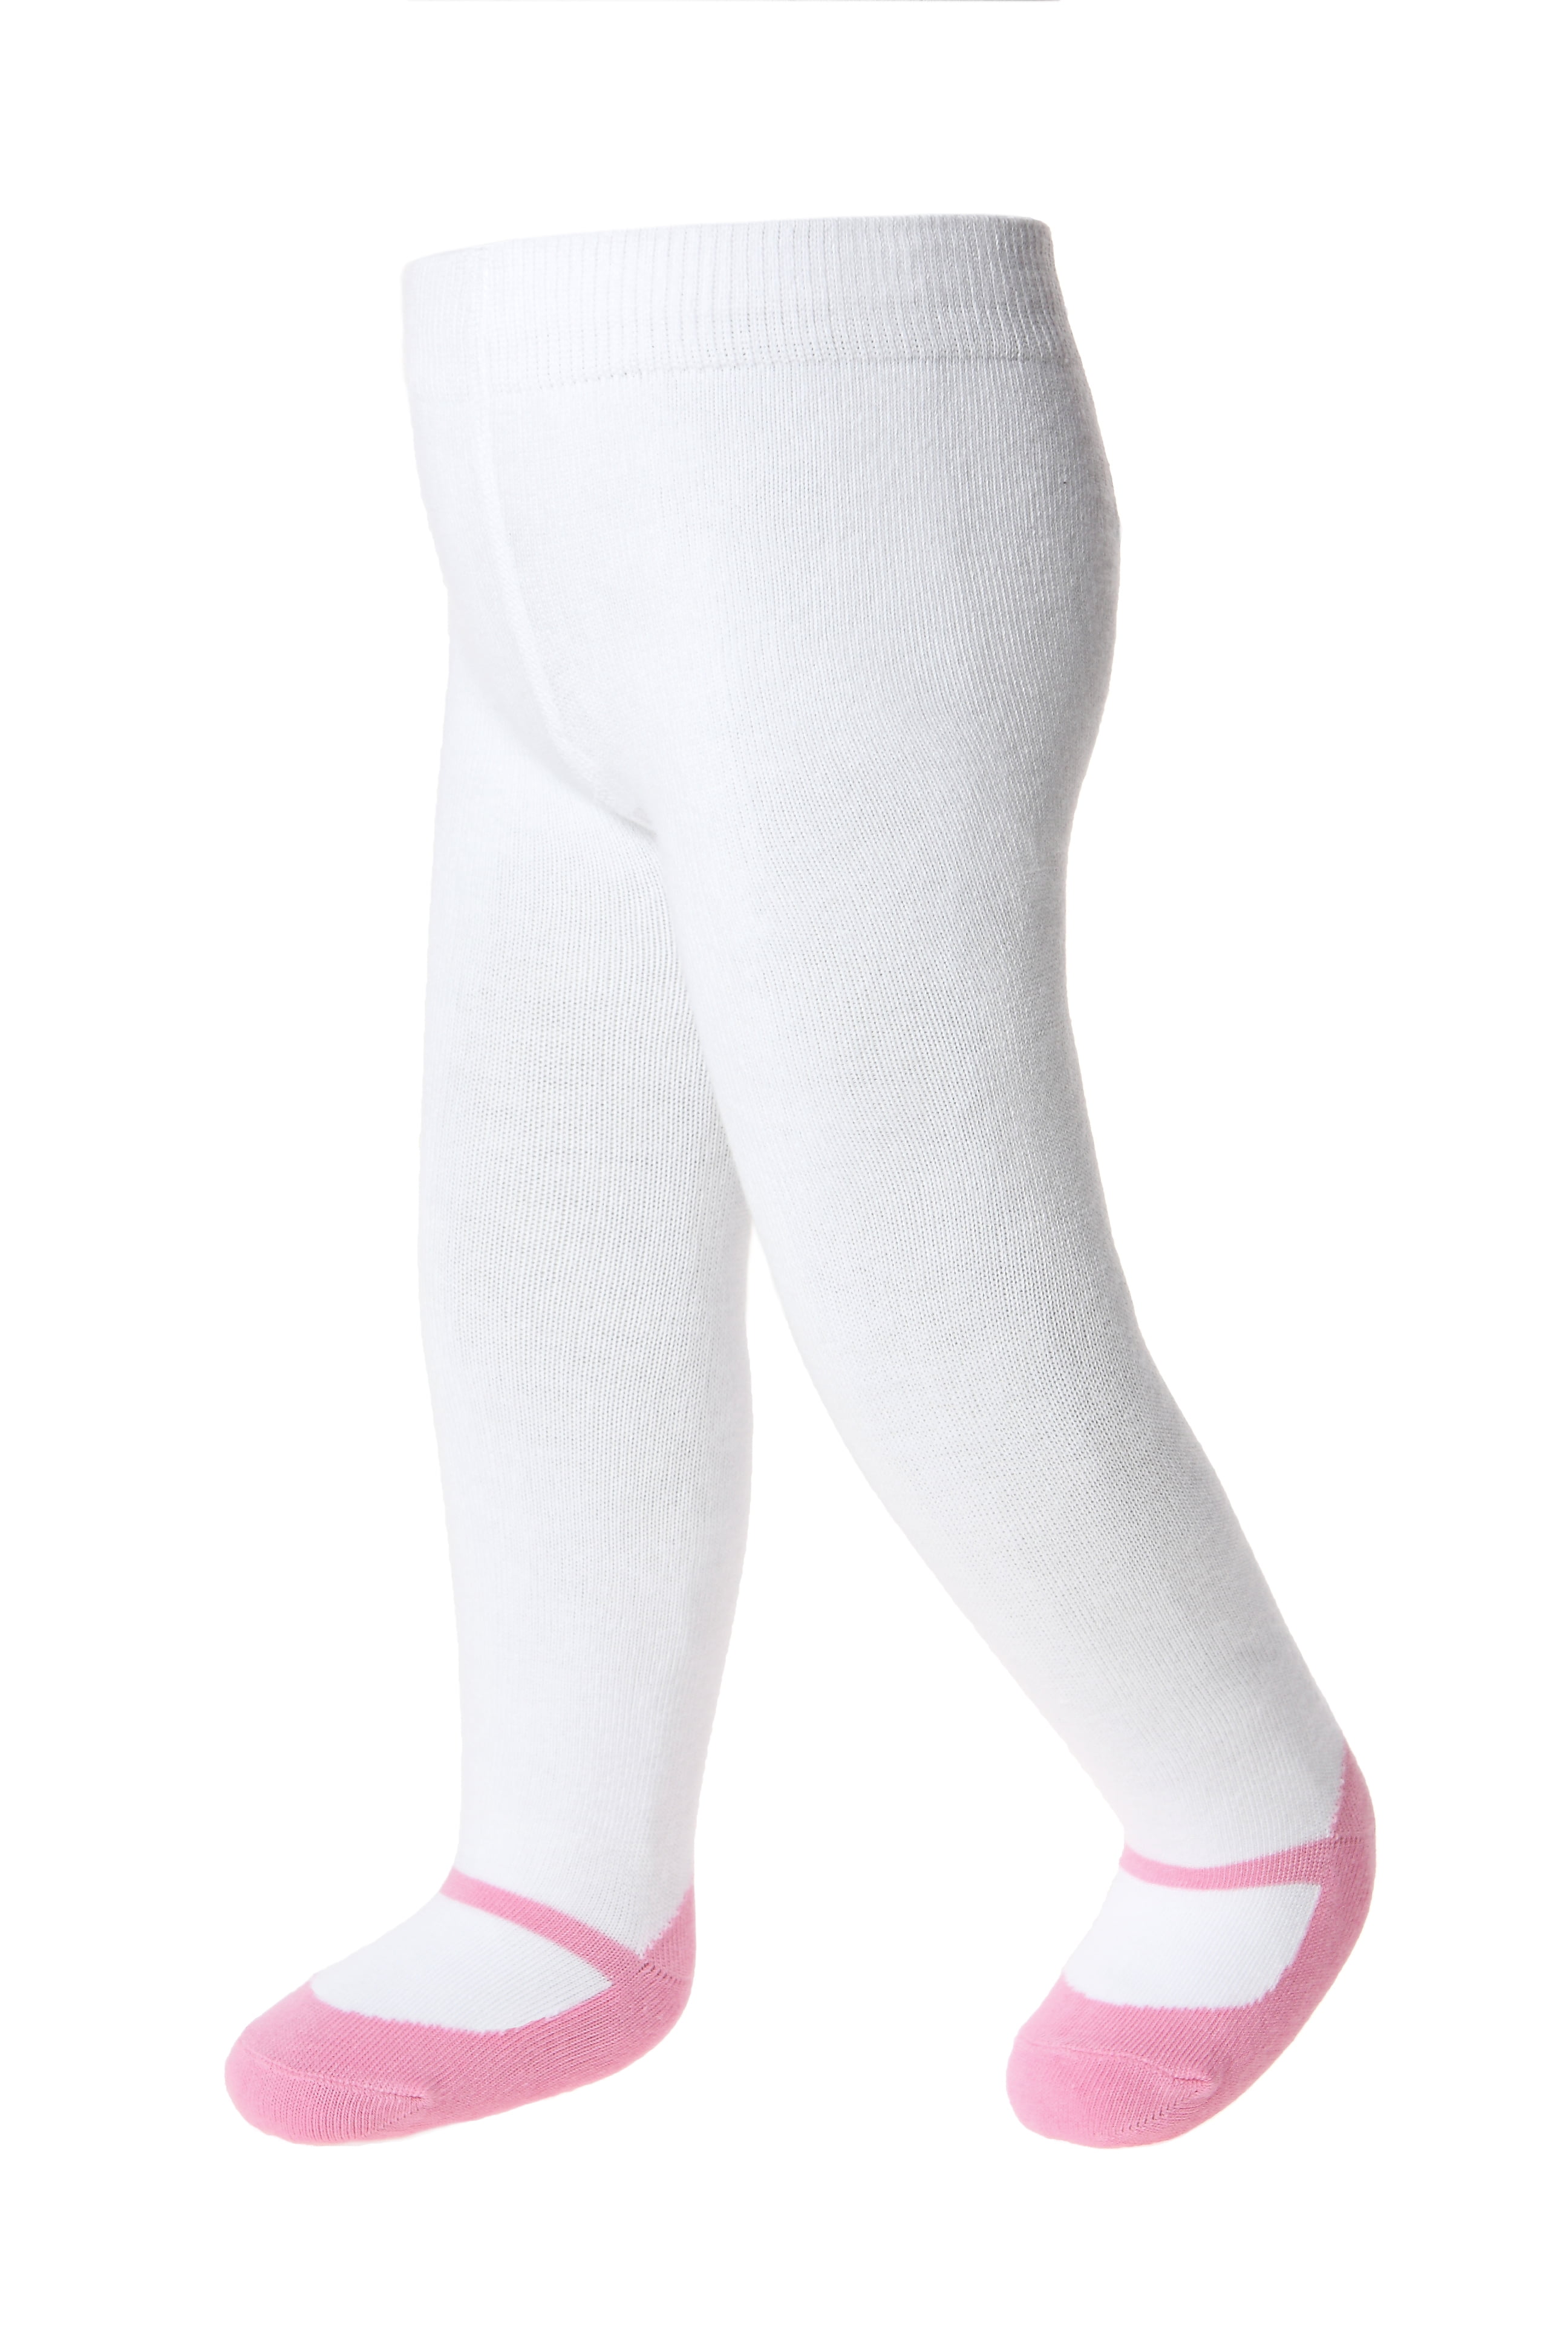 BABY GIRLS BOW TIGHTS WHITE PINK FANCY PARTY OCCASION TIGHTS WITH BOWS 0-24 MON 